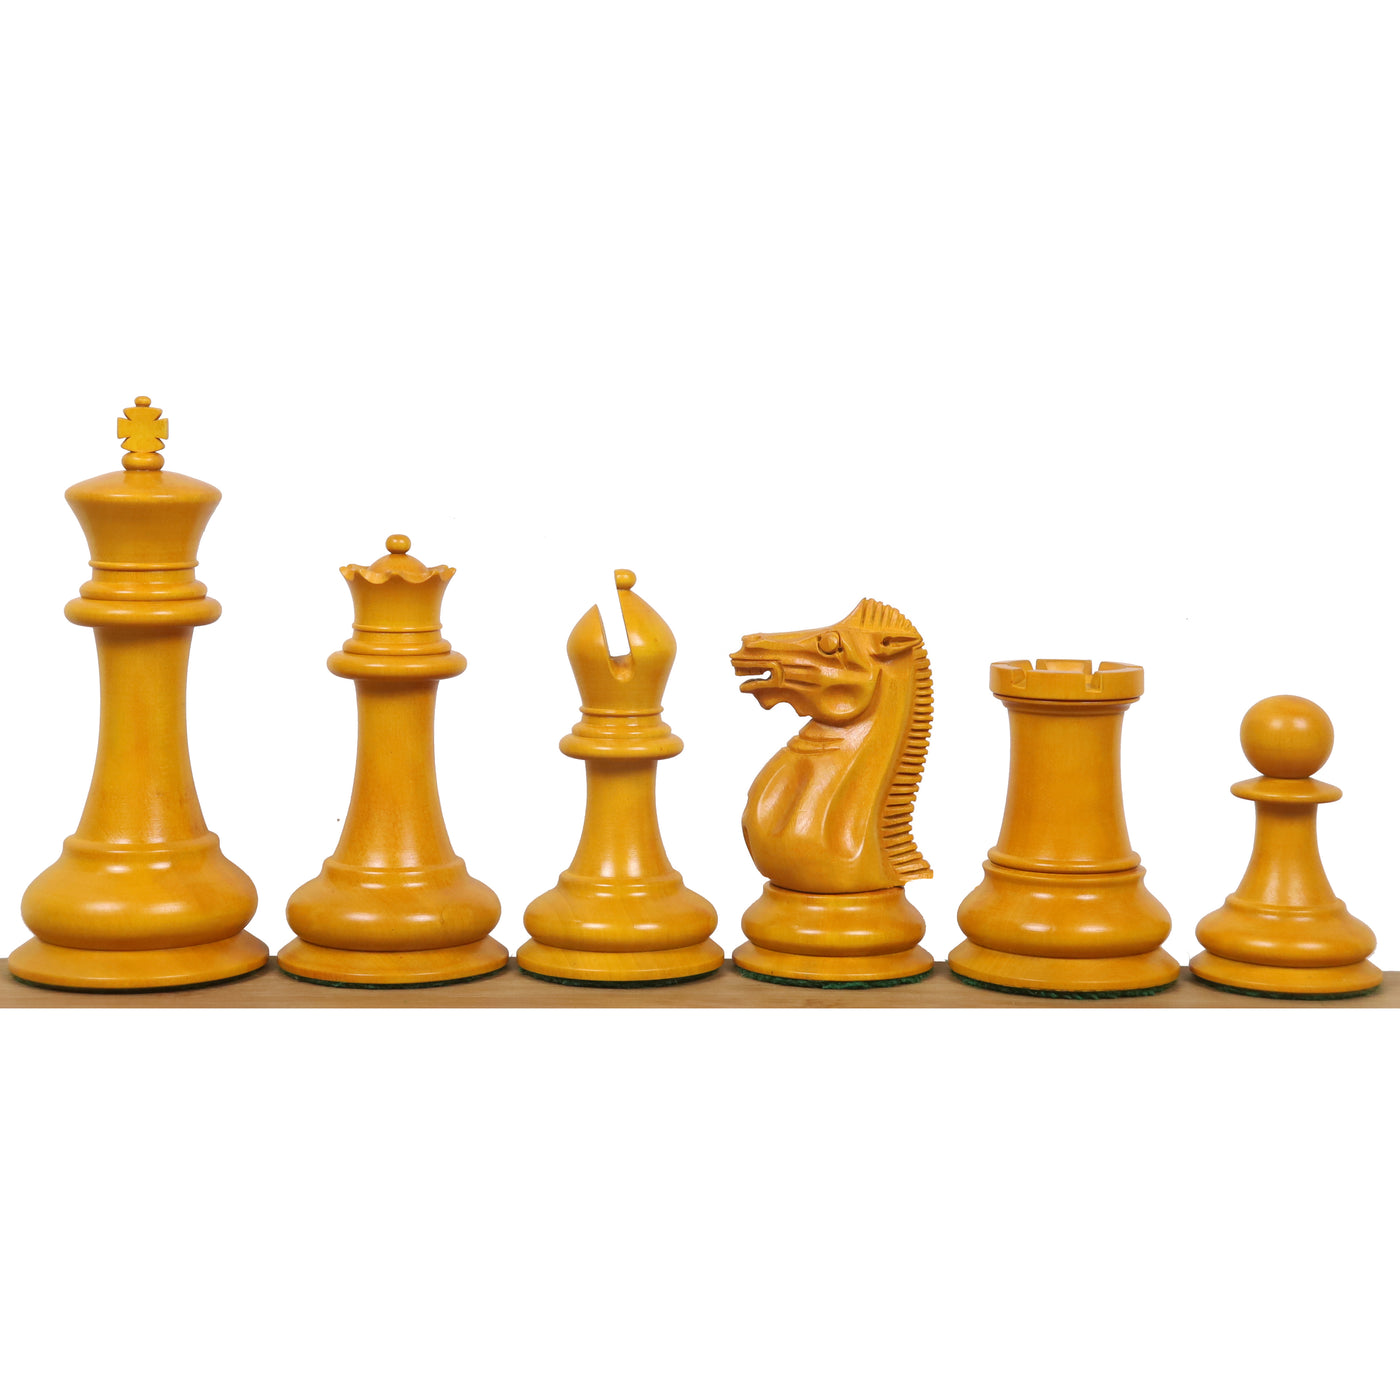 Combo of 4.5" Reproduced 1849 Staunton Antiqued Boxwood & Ebony Chess Pieces with 23inches Board and Storage Box